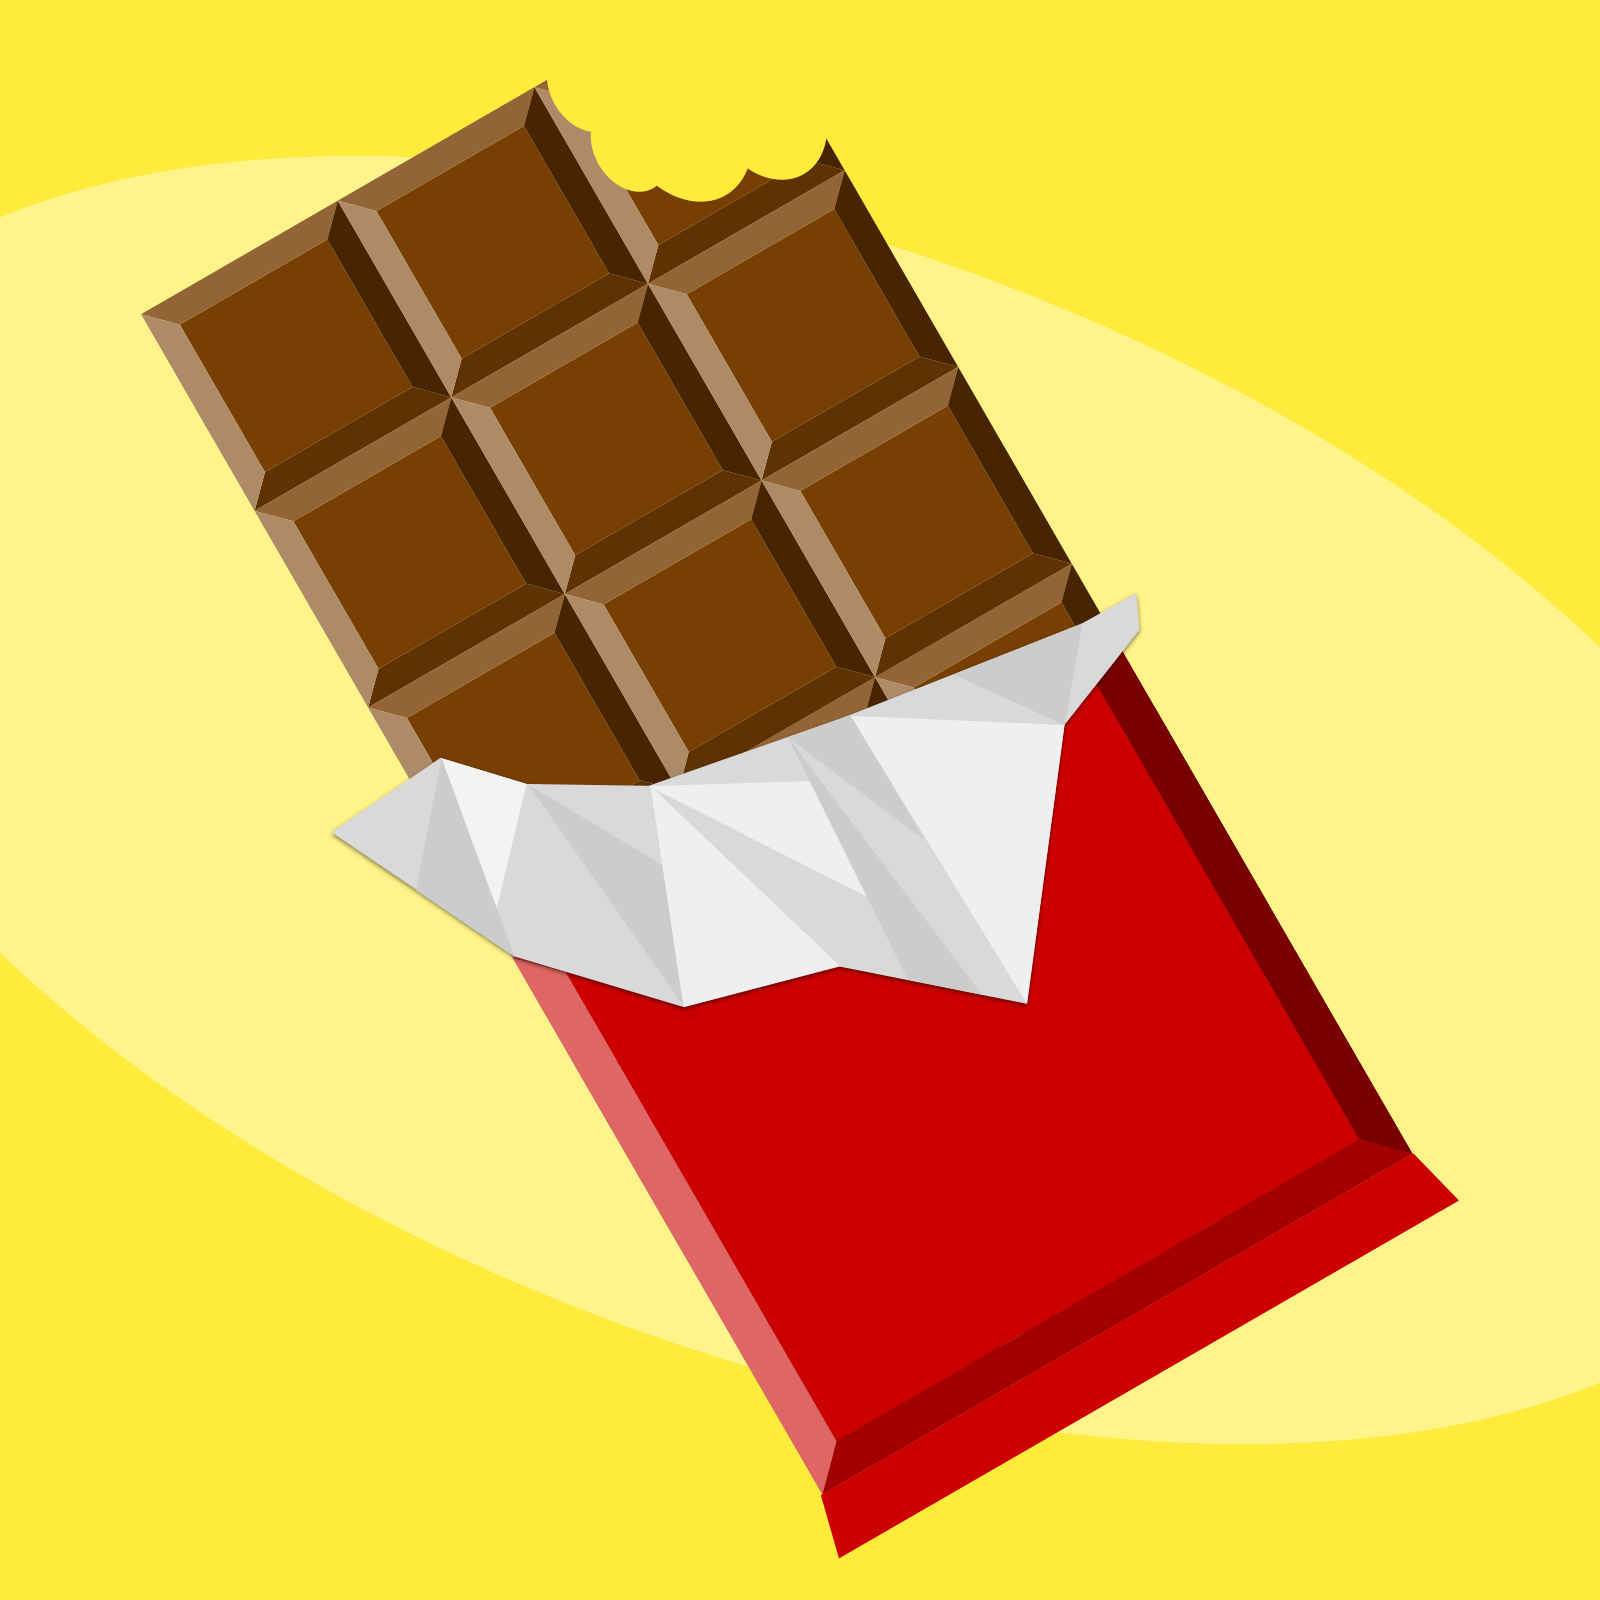 Partially unwrapped chocolate bar with a bite removed